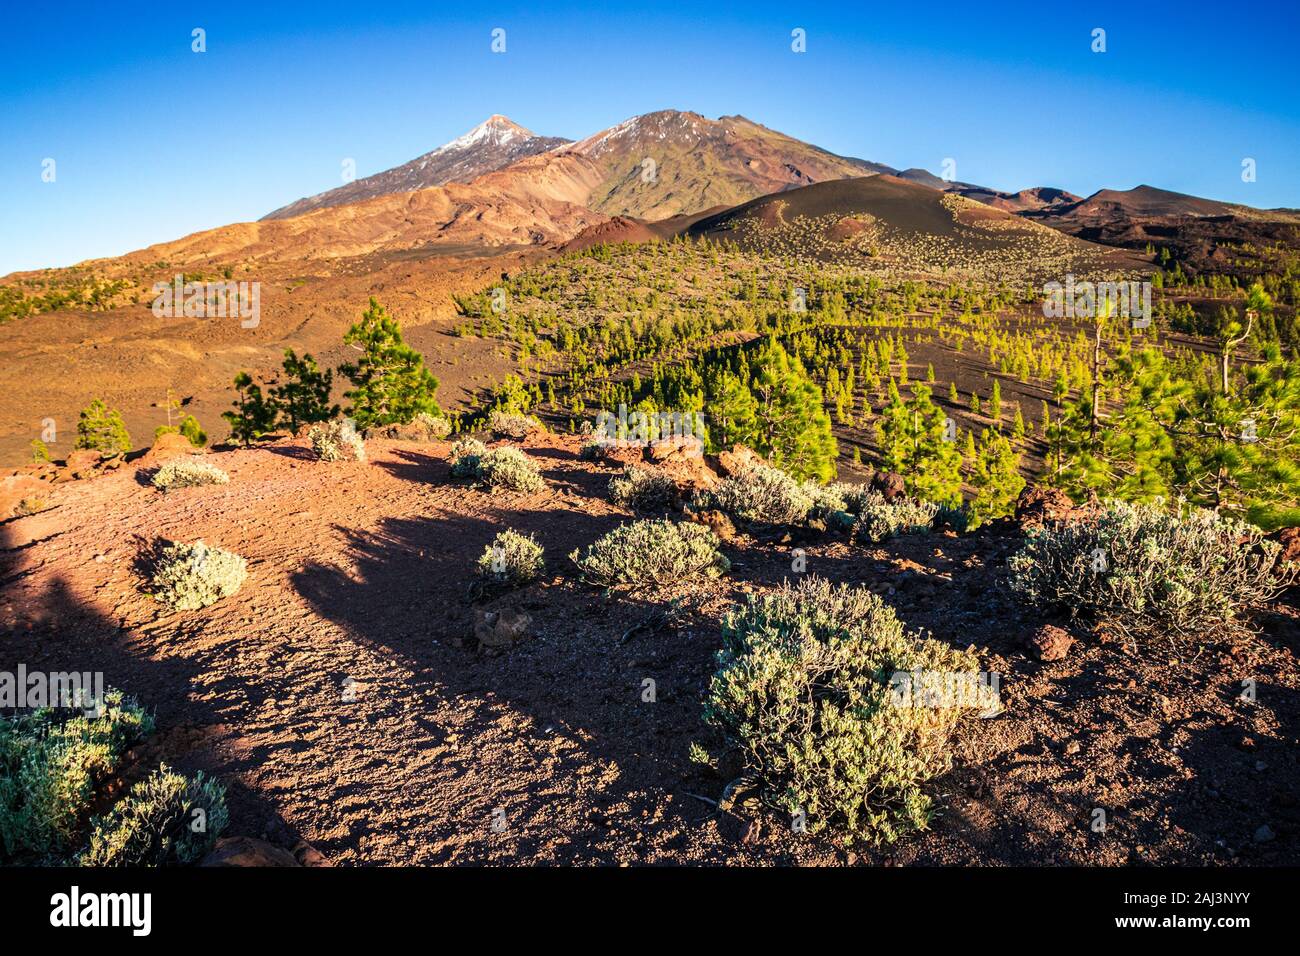 Sunset view from the top of Samara crater in Teide National Park towards the summits of Teide and Pico Viejo surrounded by the pine forest. Stock Photo